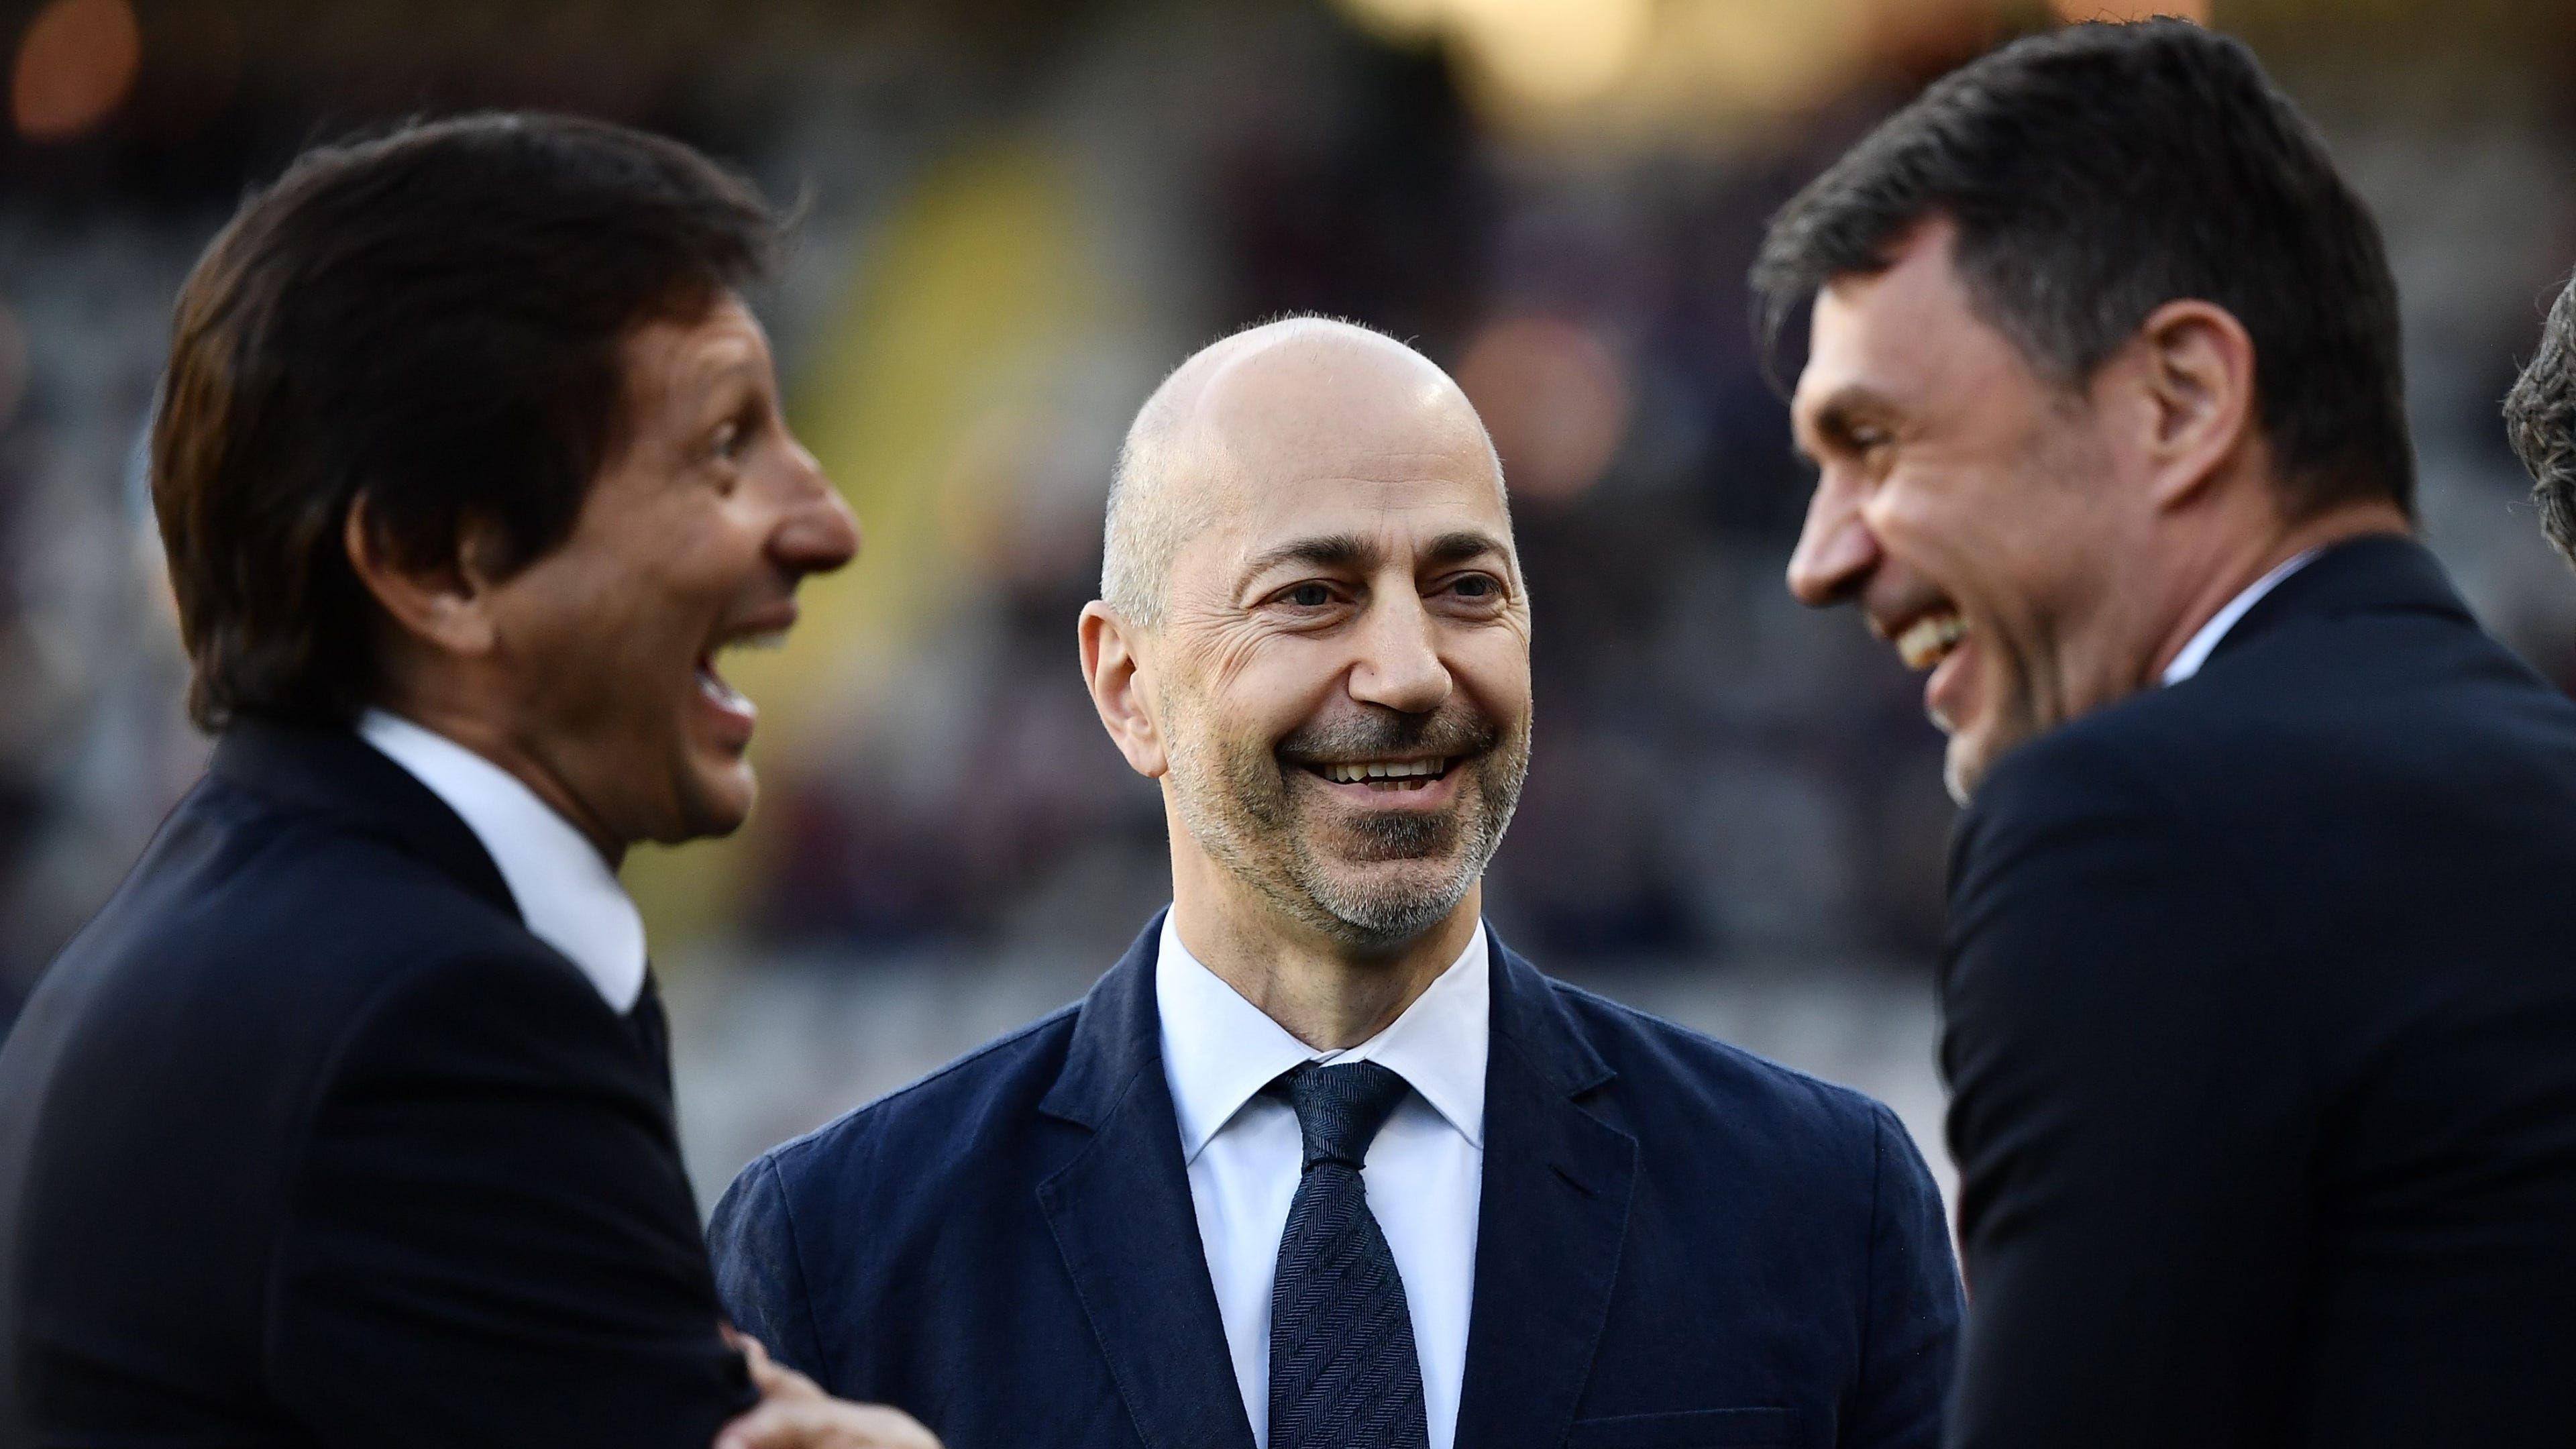 Milan CEO Ivan Gazidis claims to have saved the club from bankruptcy as he defends Pioli appointment | Goal.com